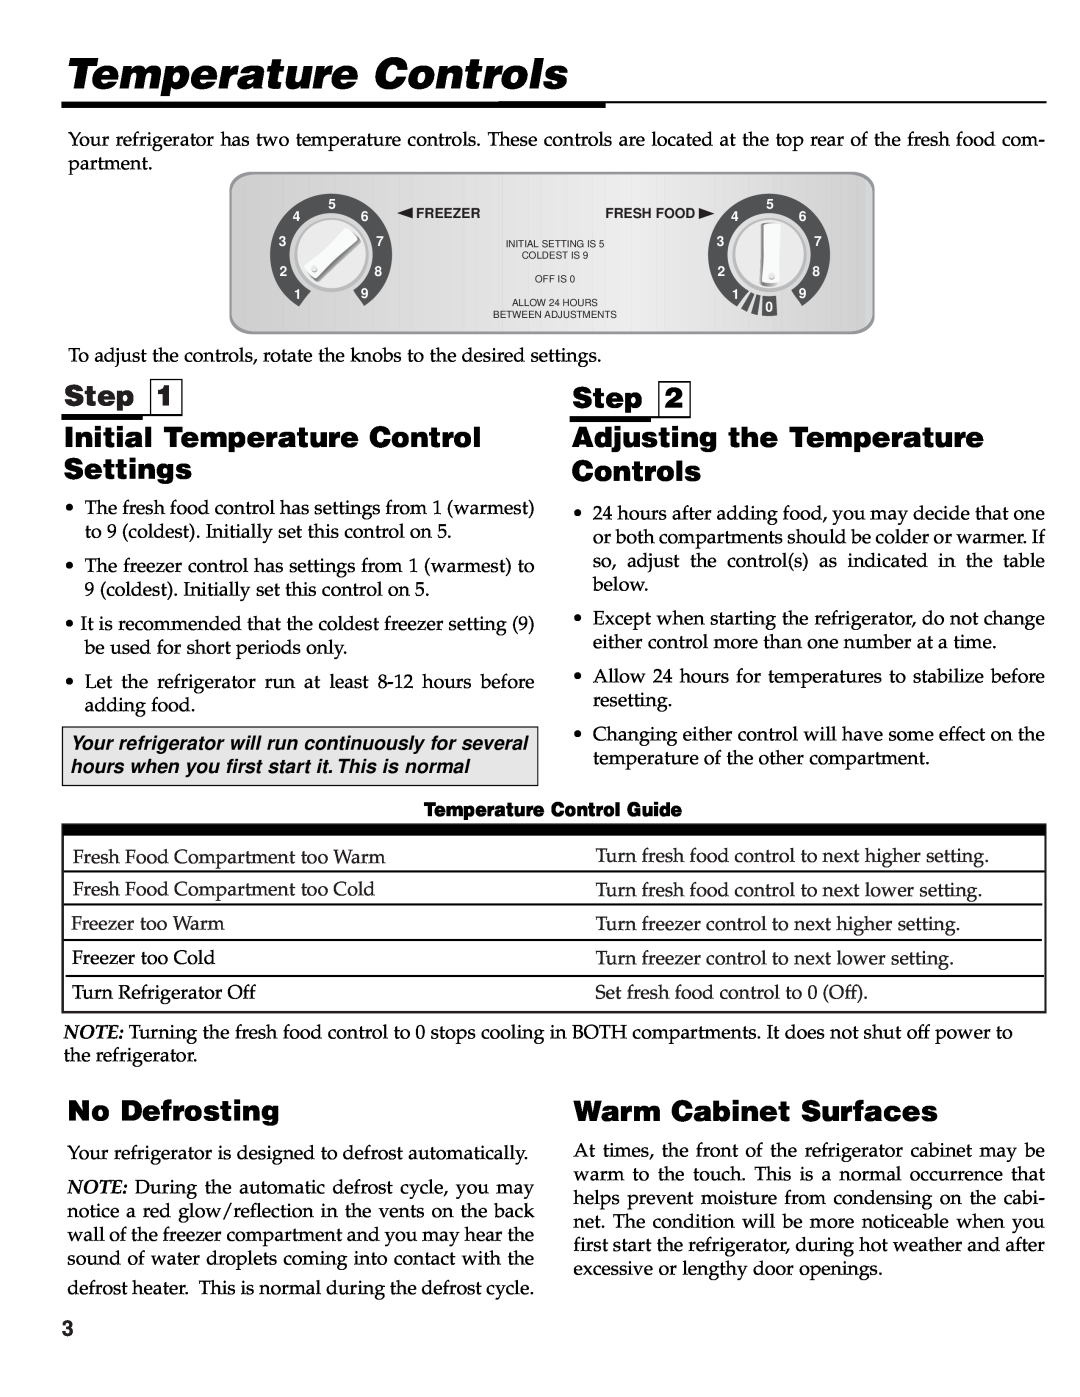 Maytag SXS 111107-1 Temperature Controls, Step Initial Temperature Control Settings, No Defrosting, Warm Cabinet Surfaces 